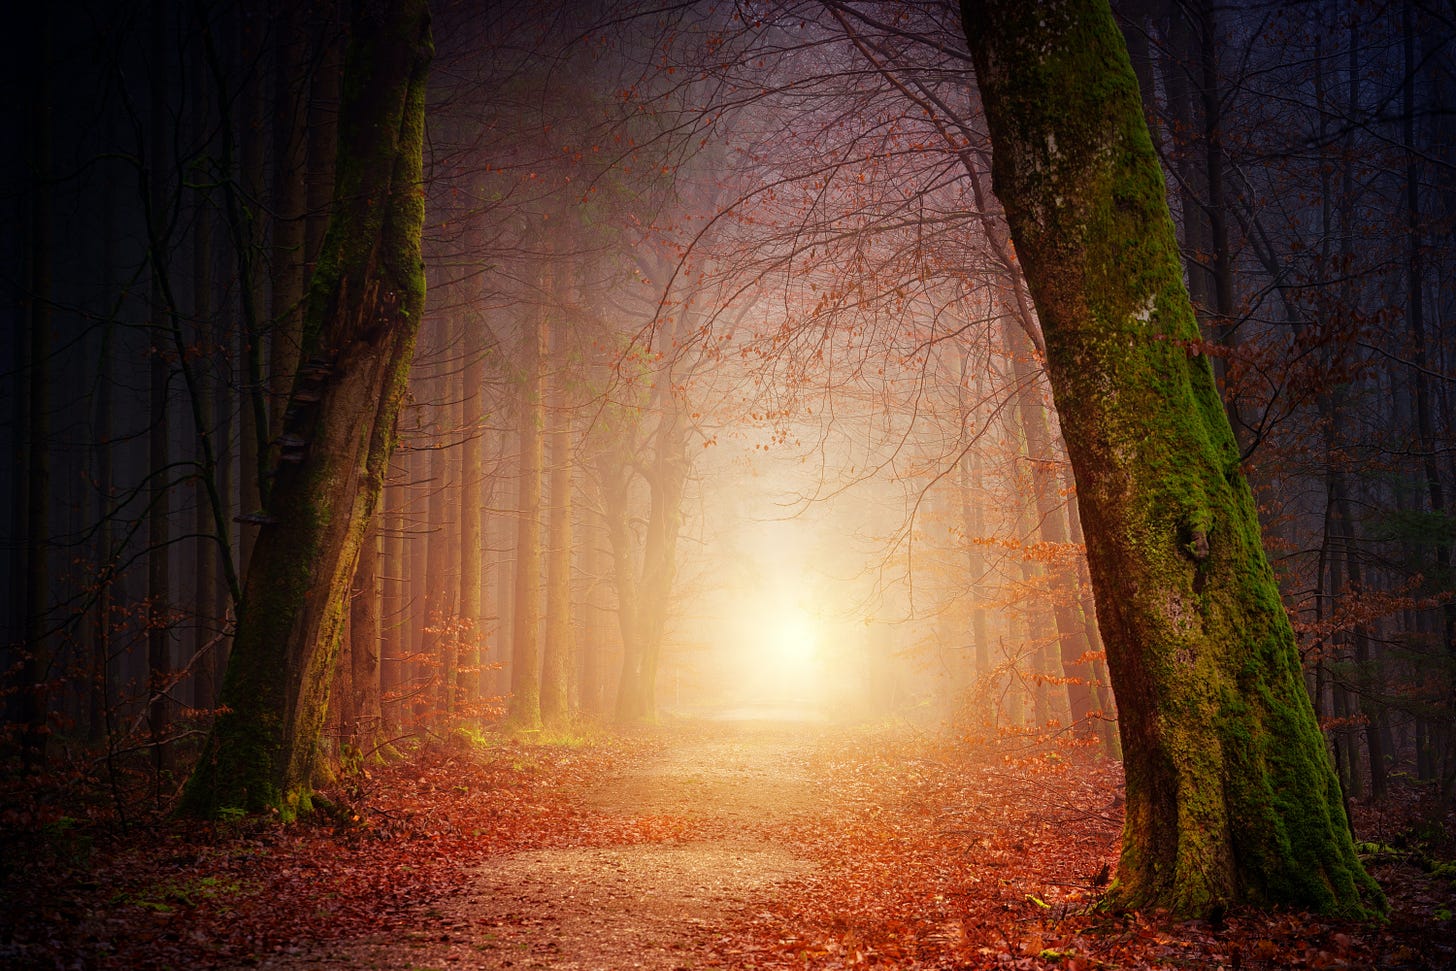 A light shines at the end of a forest path